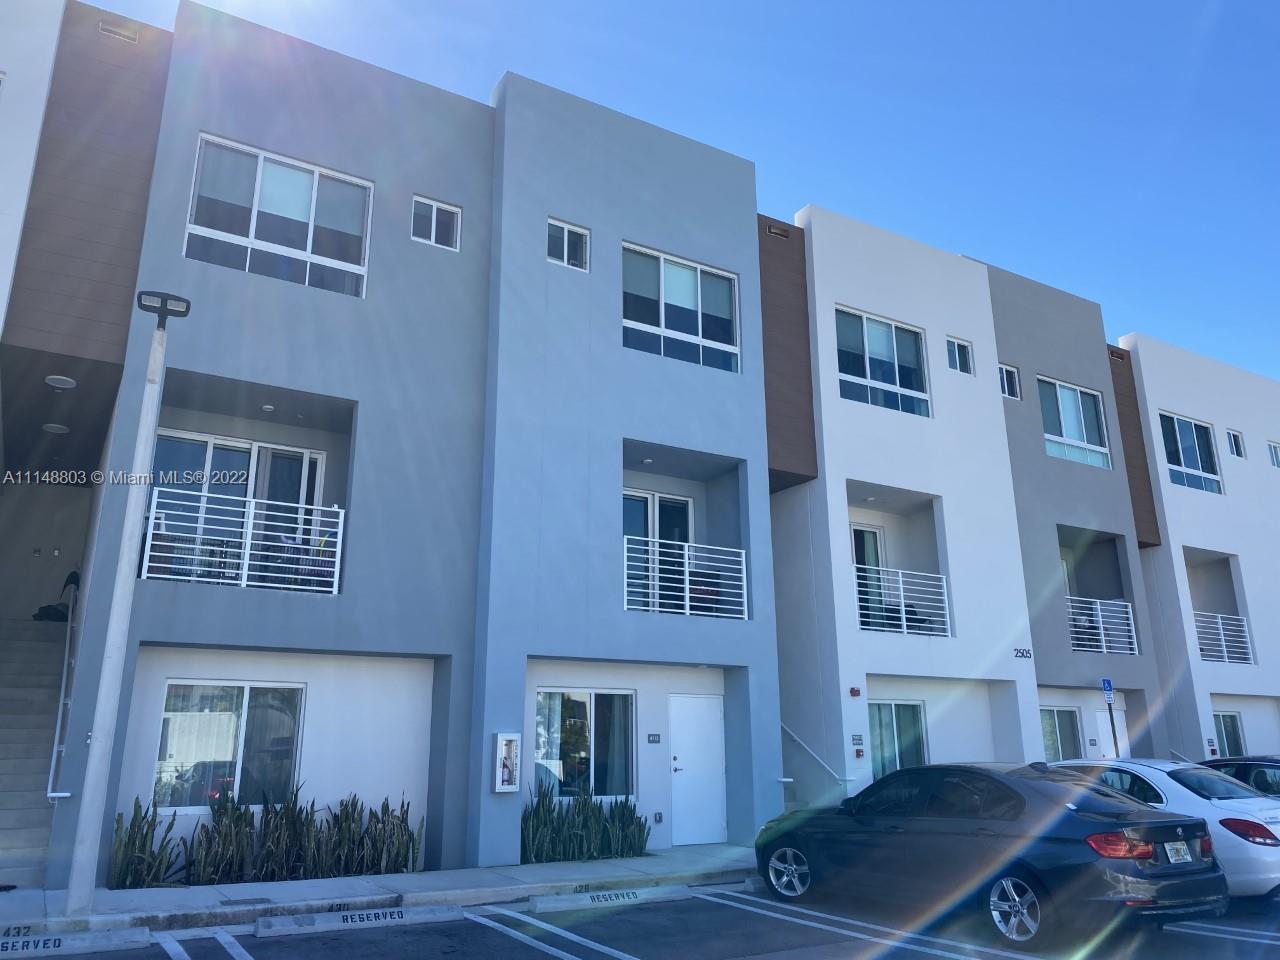 Cozy new construction a stone throw away from Aventura. Unit boasts a two story, 2 bedroom 2.5 bath 